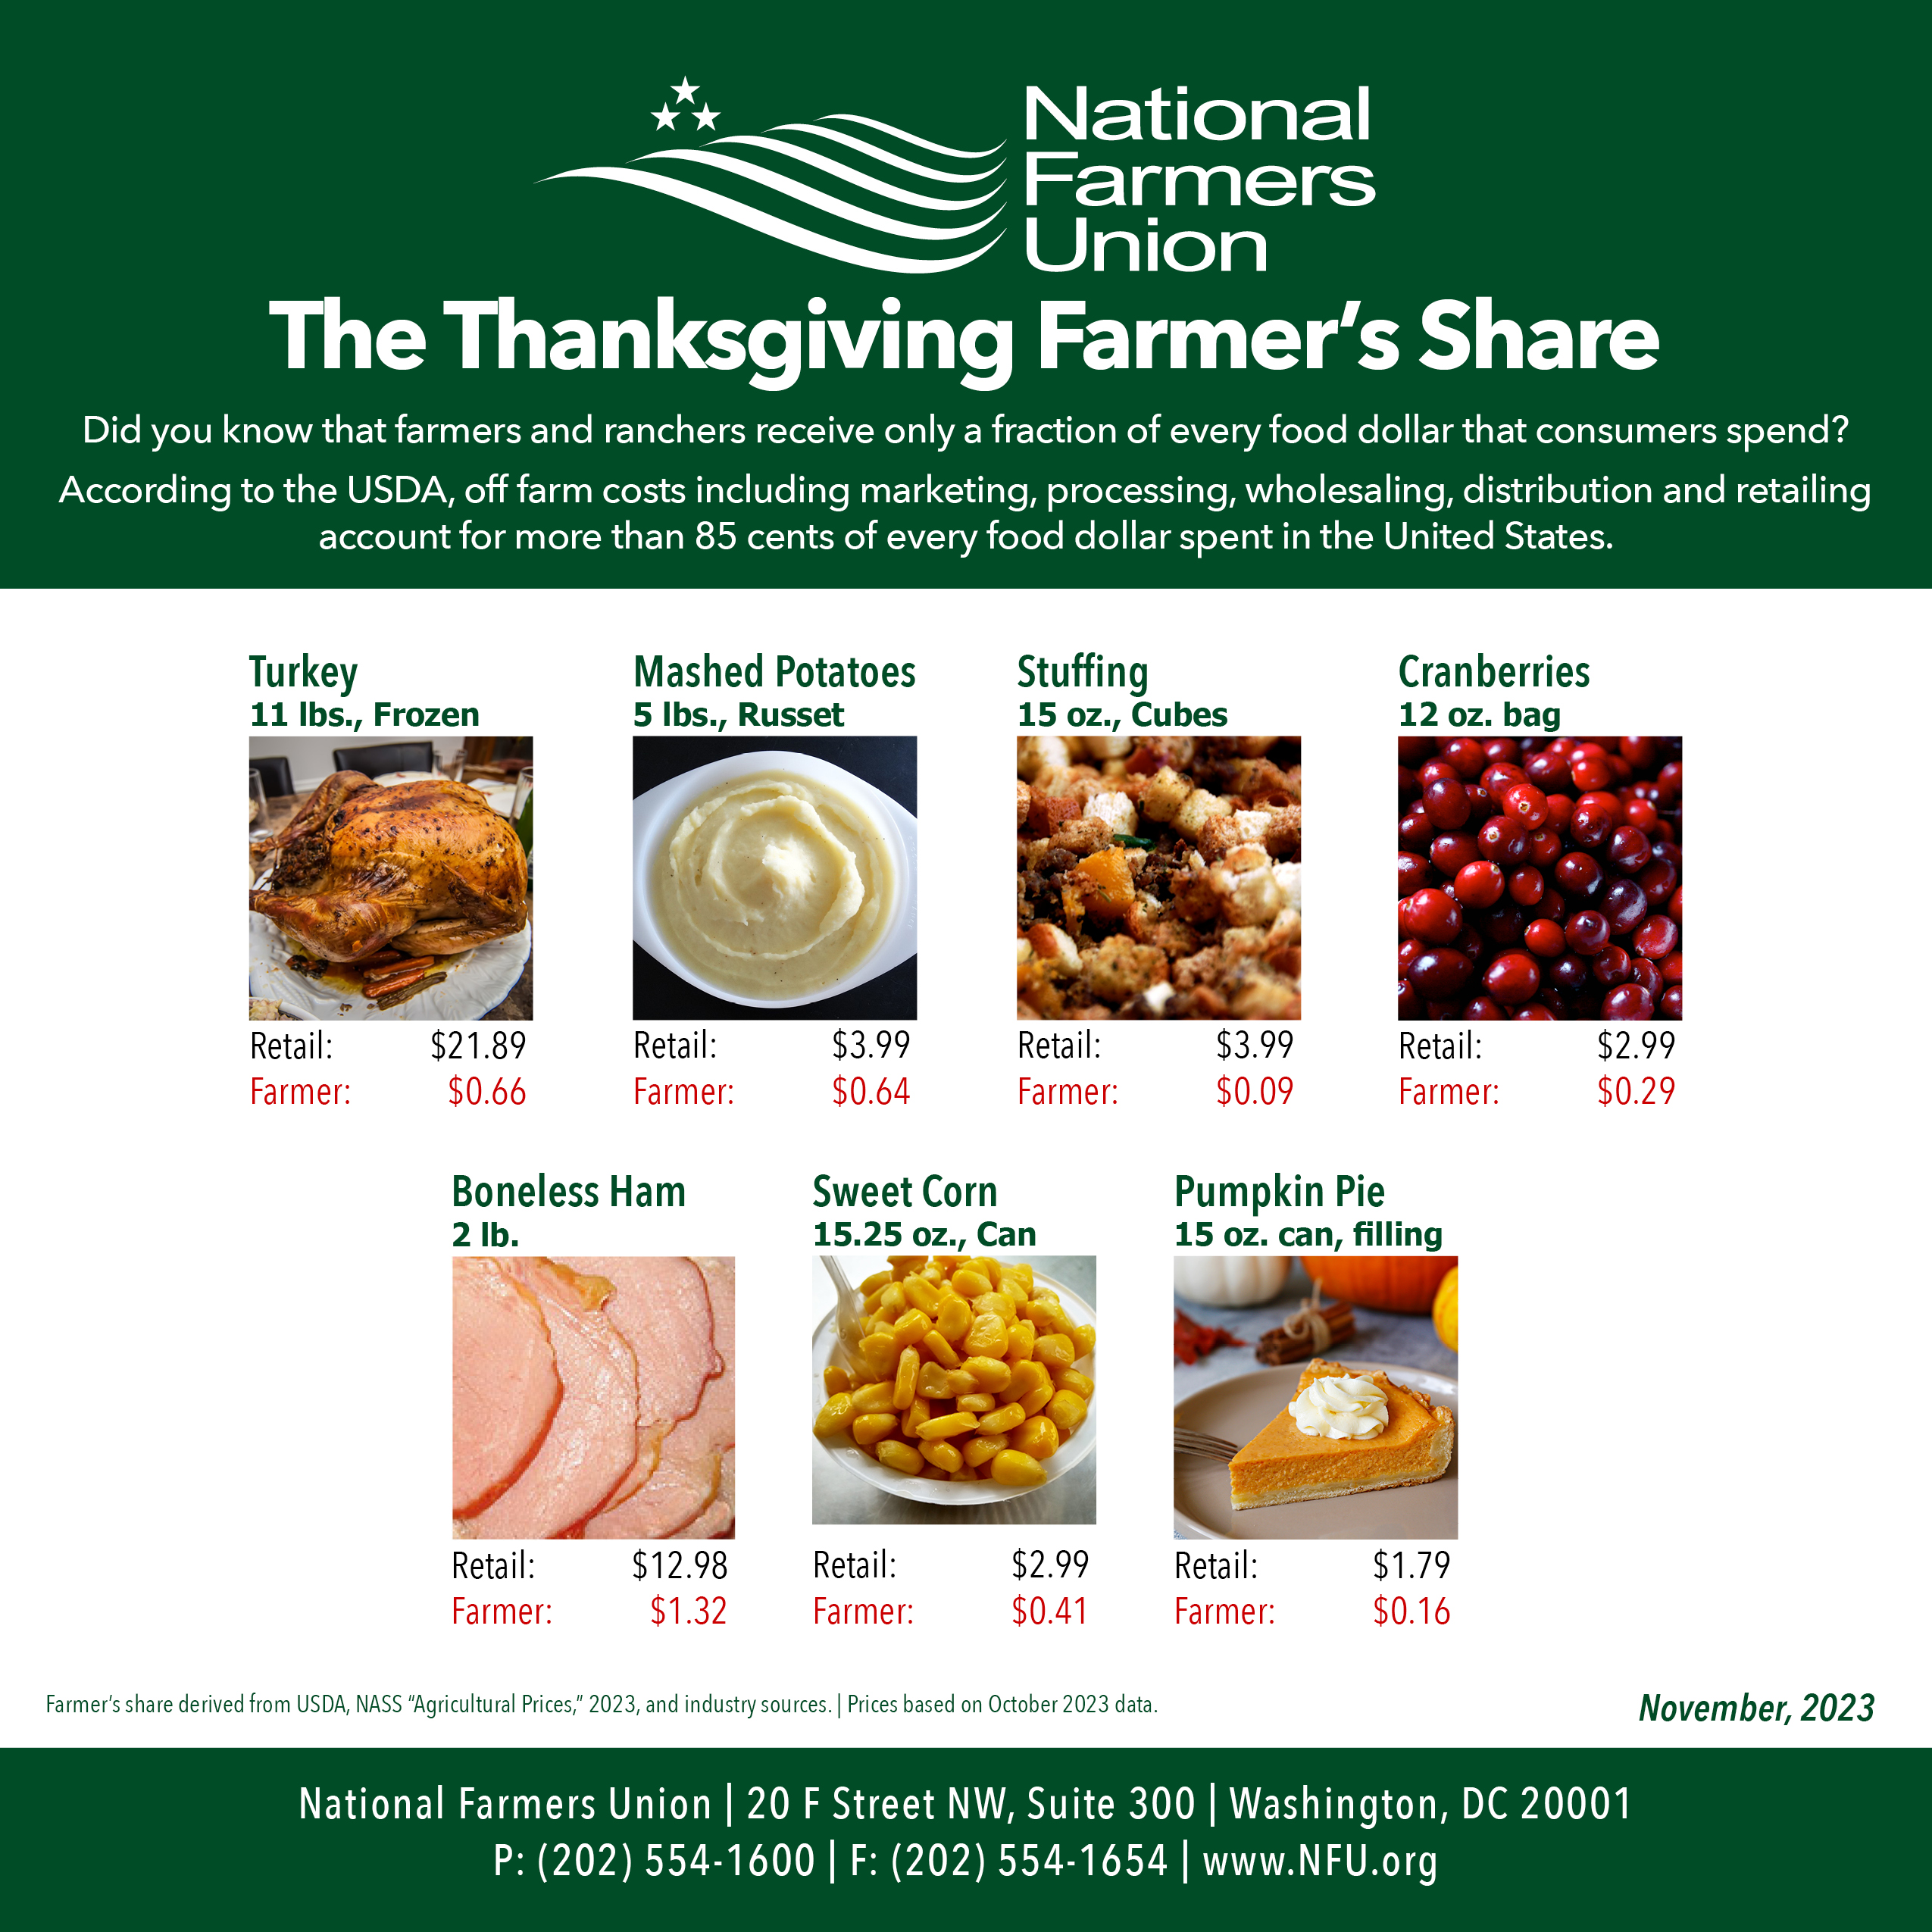 NFU Releases 2023 Farmer’s Share of Thanksgiving Food Dollar